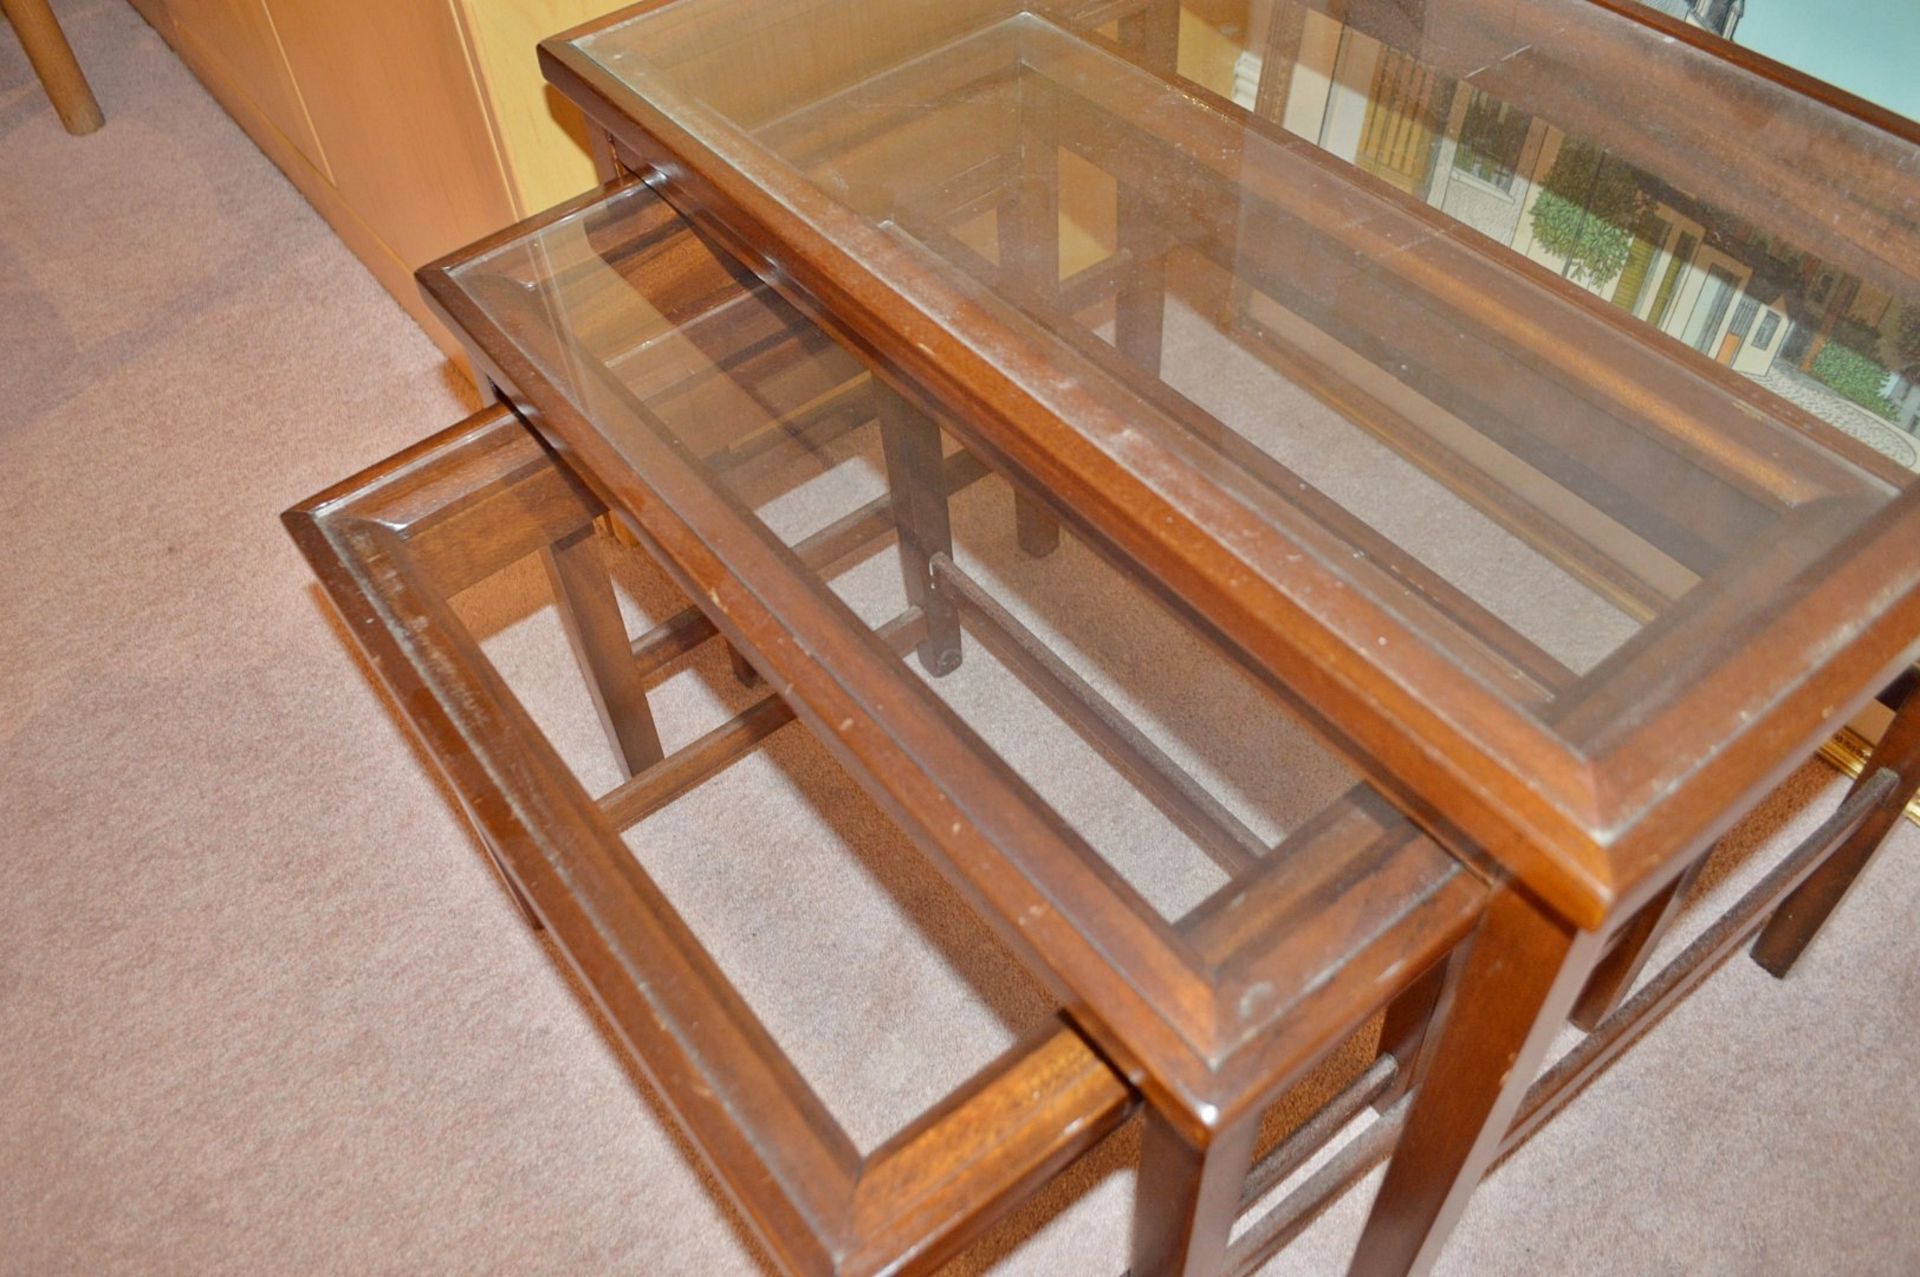 1 x Nest of Wooden Glass Topped Tables - CL368 - Bowdon WA14 - NO VAT - Image 5 of 8